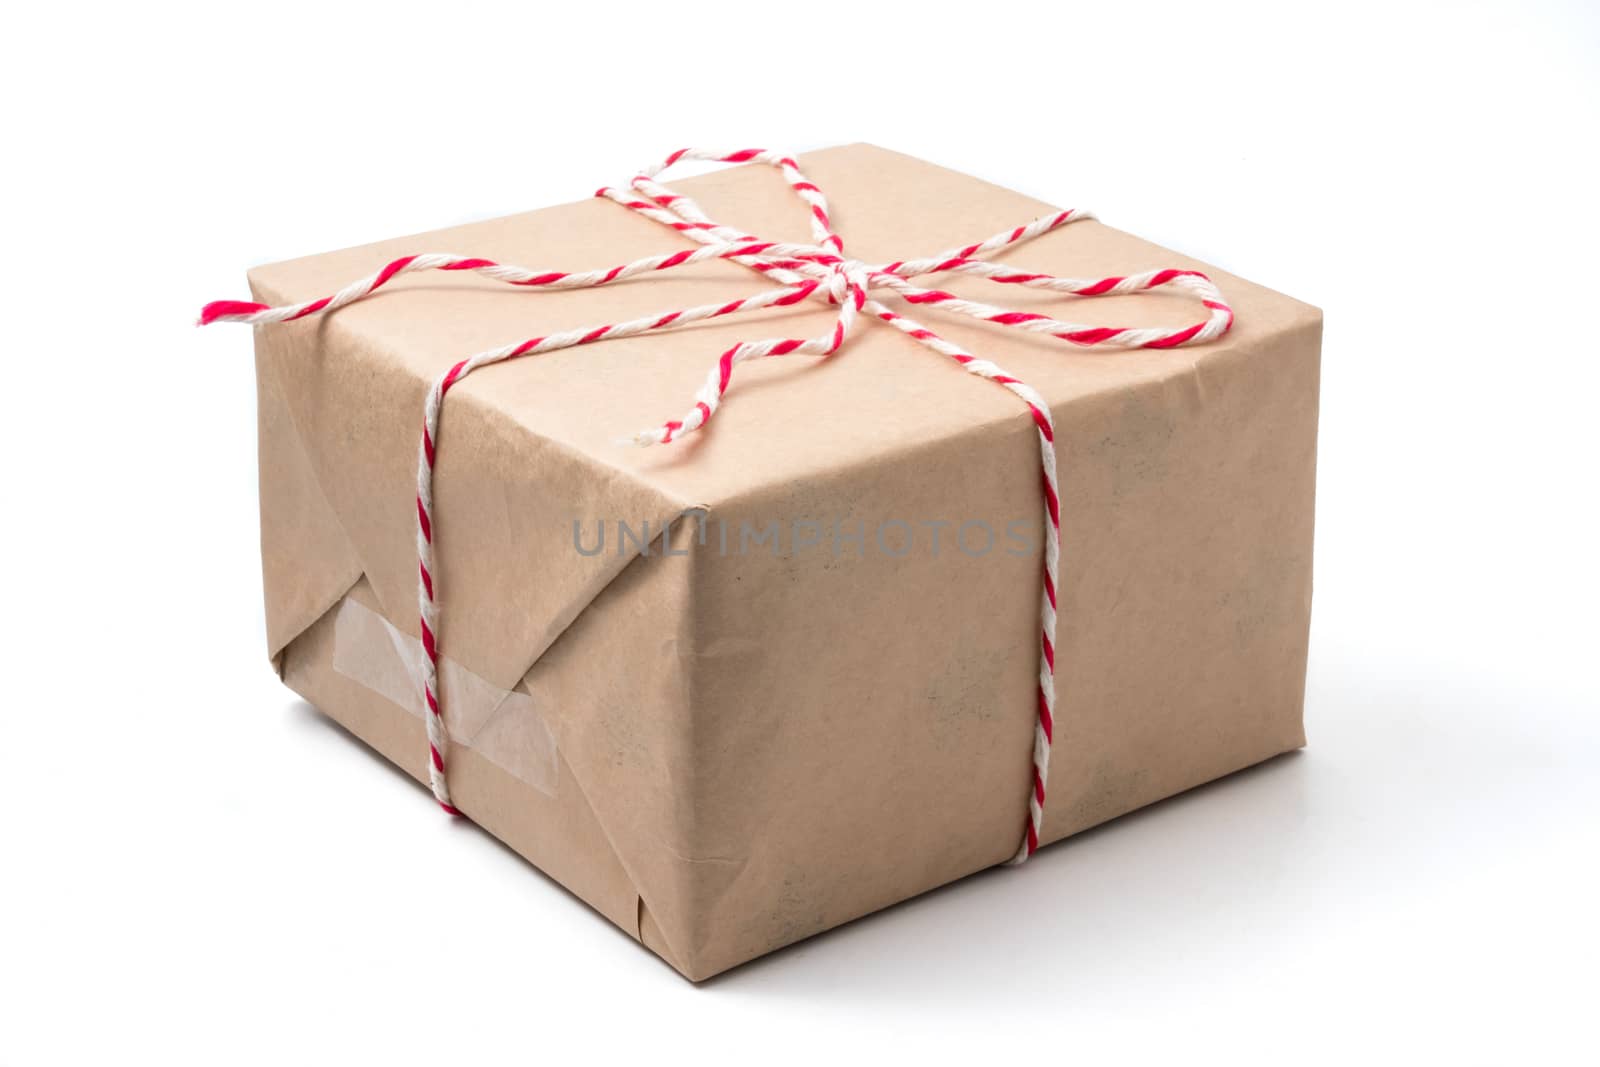 Gift package wrapped in brown paper on white background.